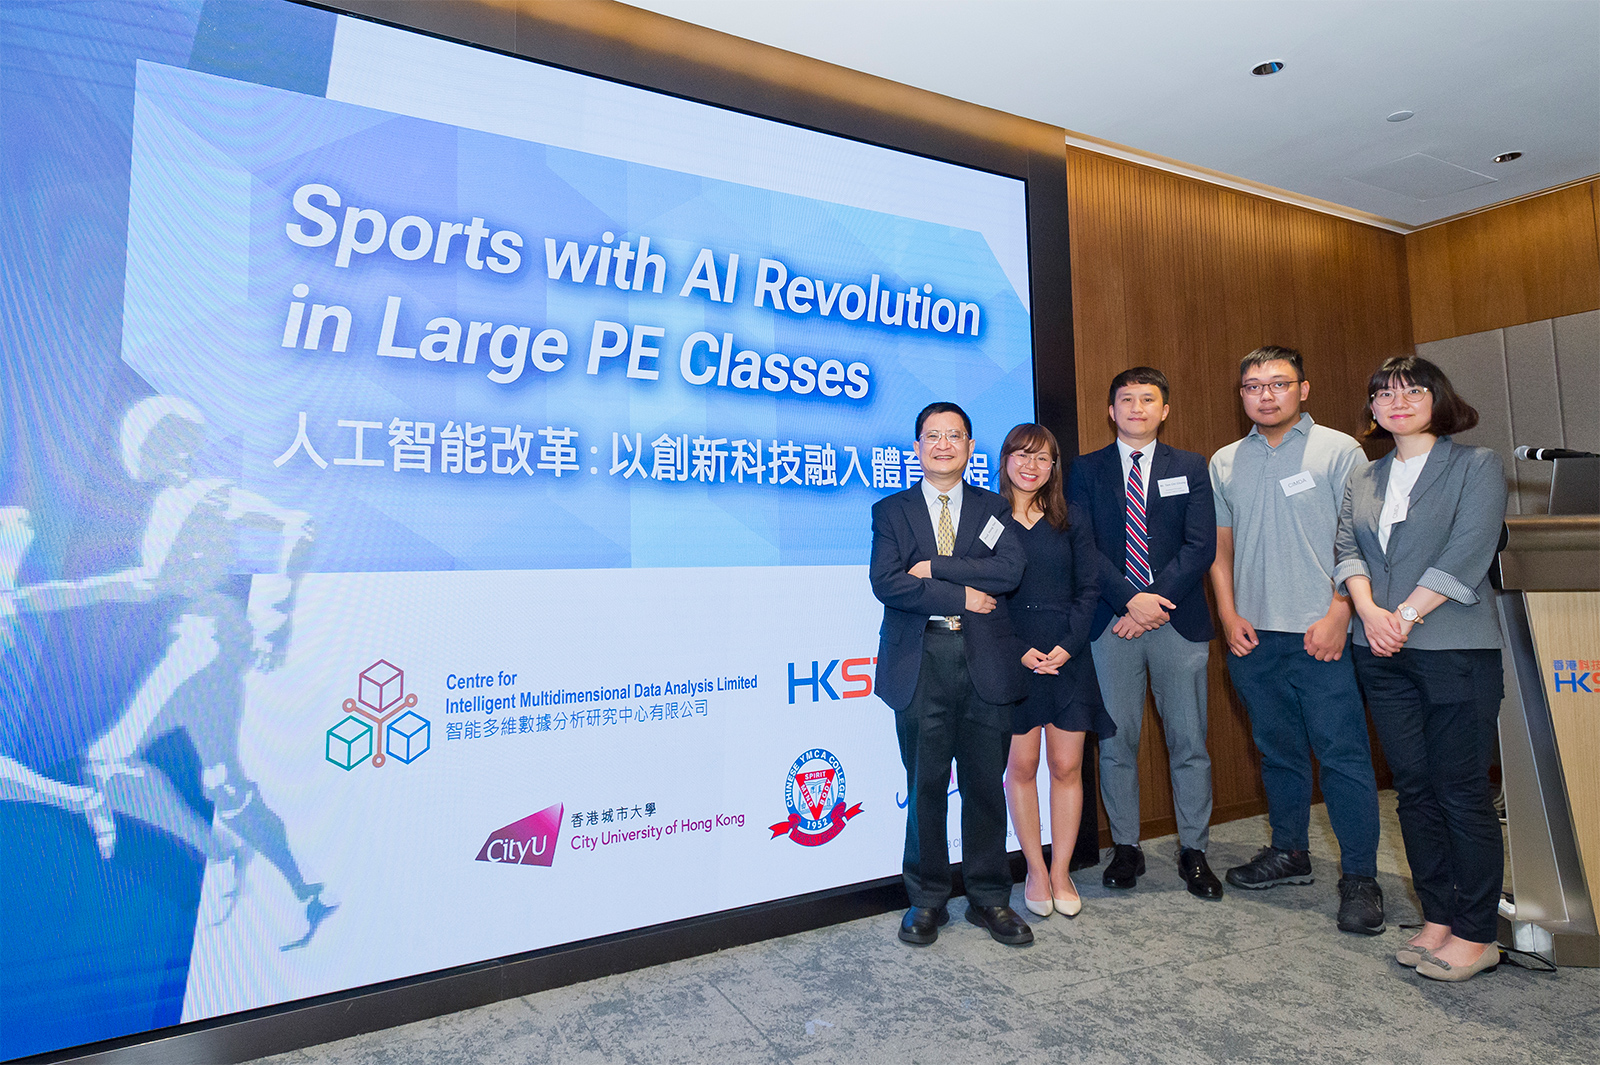 Professor Yan (first from left), CIMDA colleagues, and their school collaborator in a sharing session for the two new AI technologies that support physical fitness for students and teachers.